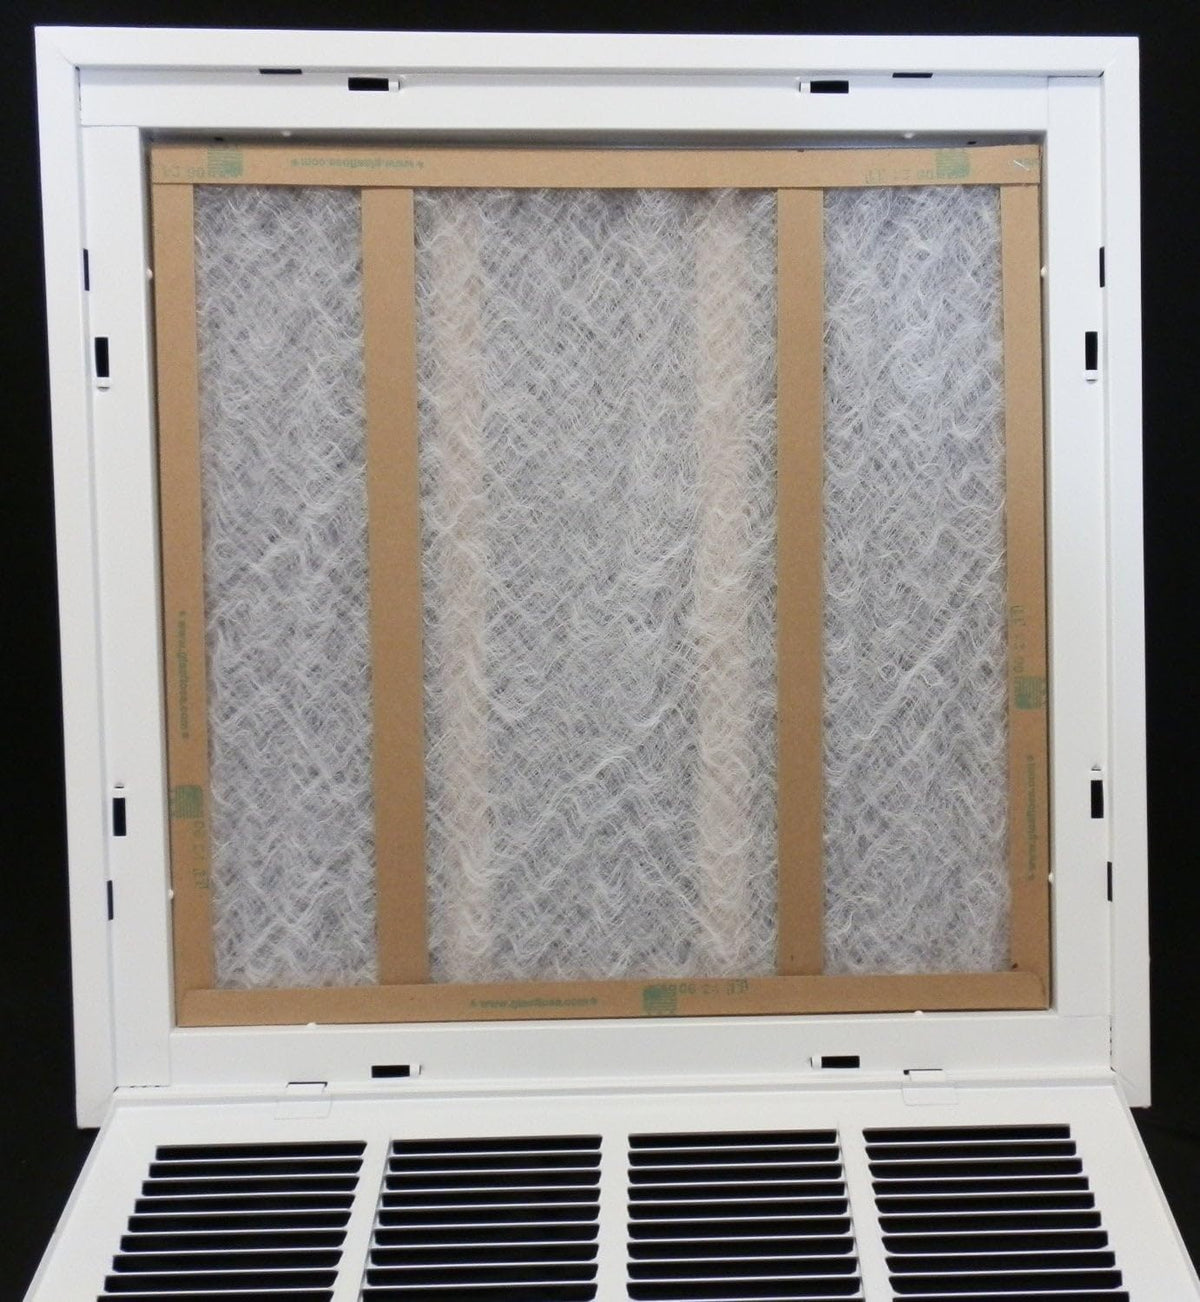 36&quot; X 14&quot; Steel Return Air Filter Grille for 1&quot; Filter - Fixed Hinged - [Outer Dimensions: 38 5/8&quot; X 16 5/8&quot;]